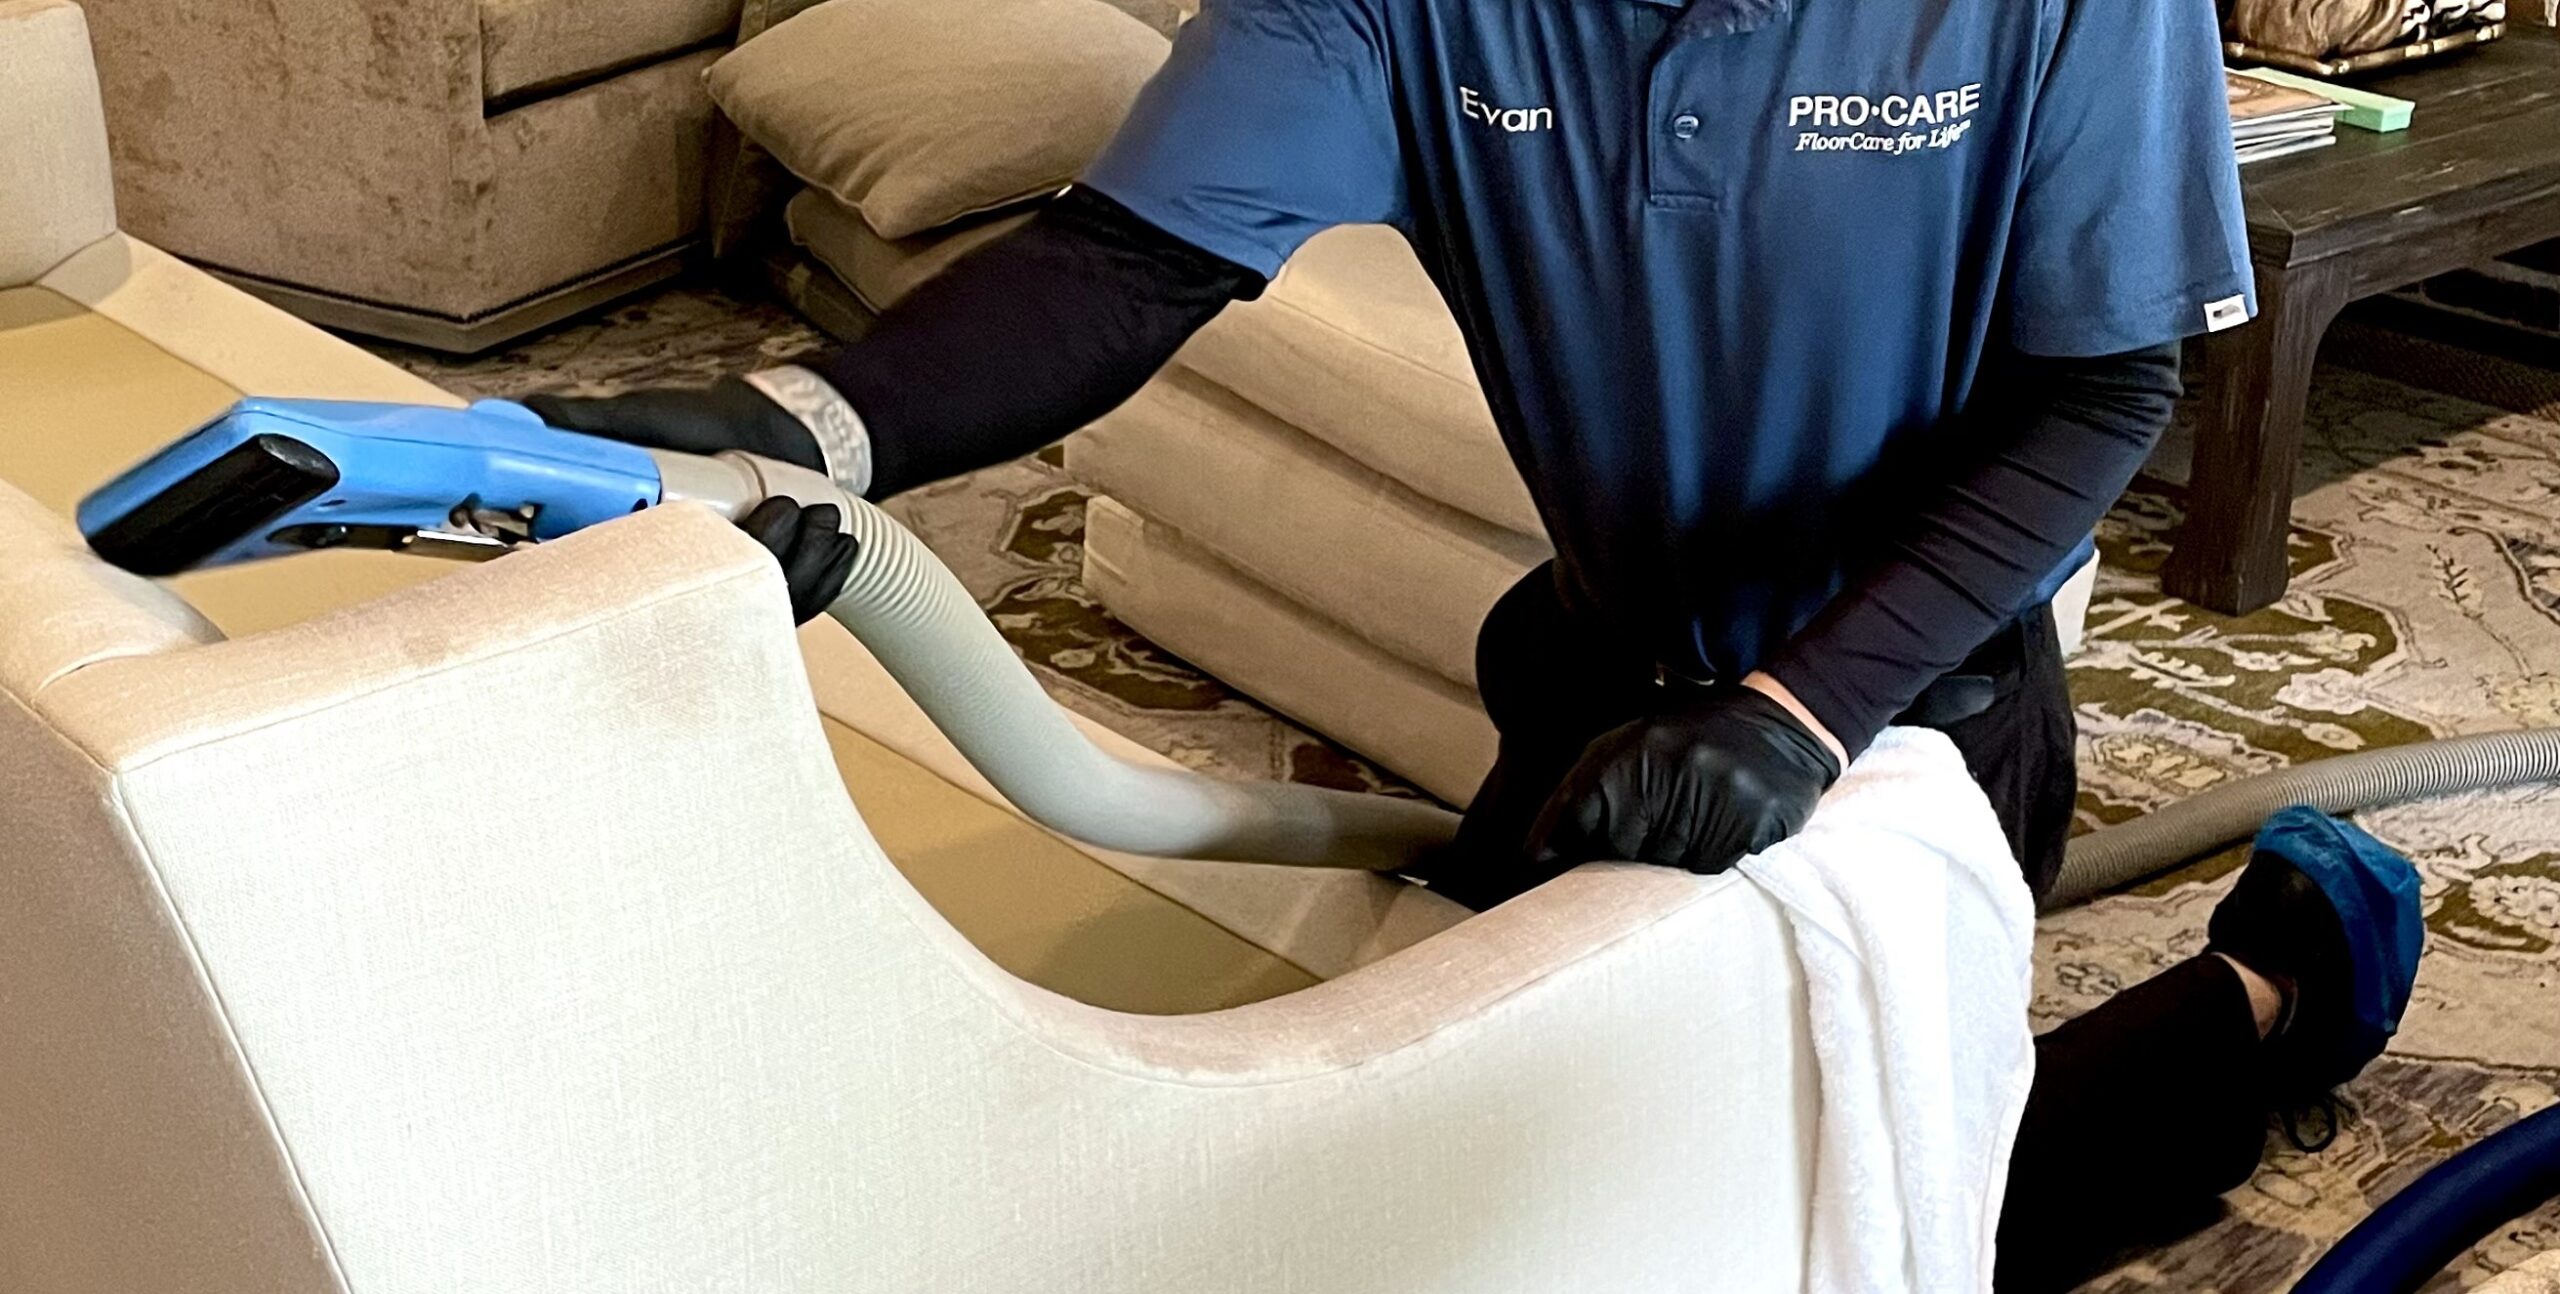 Technicians will pay particular attention to any areas of concern on your upholstery that you point out.